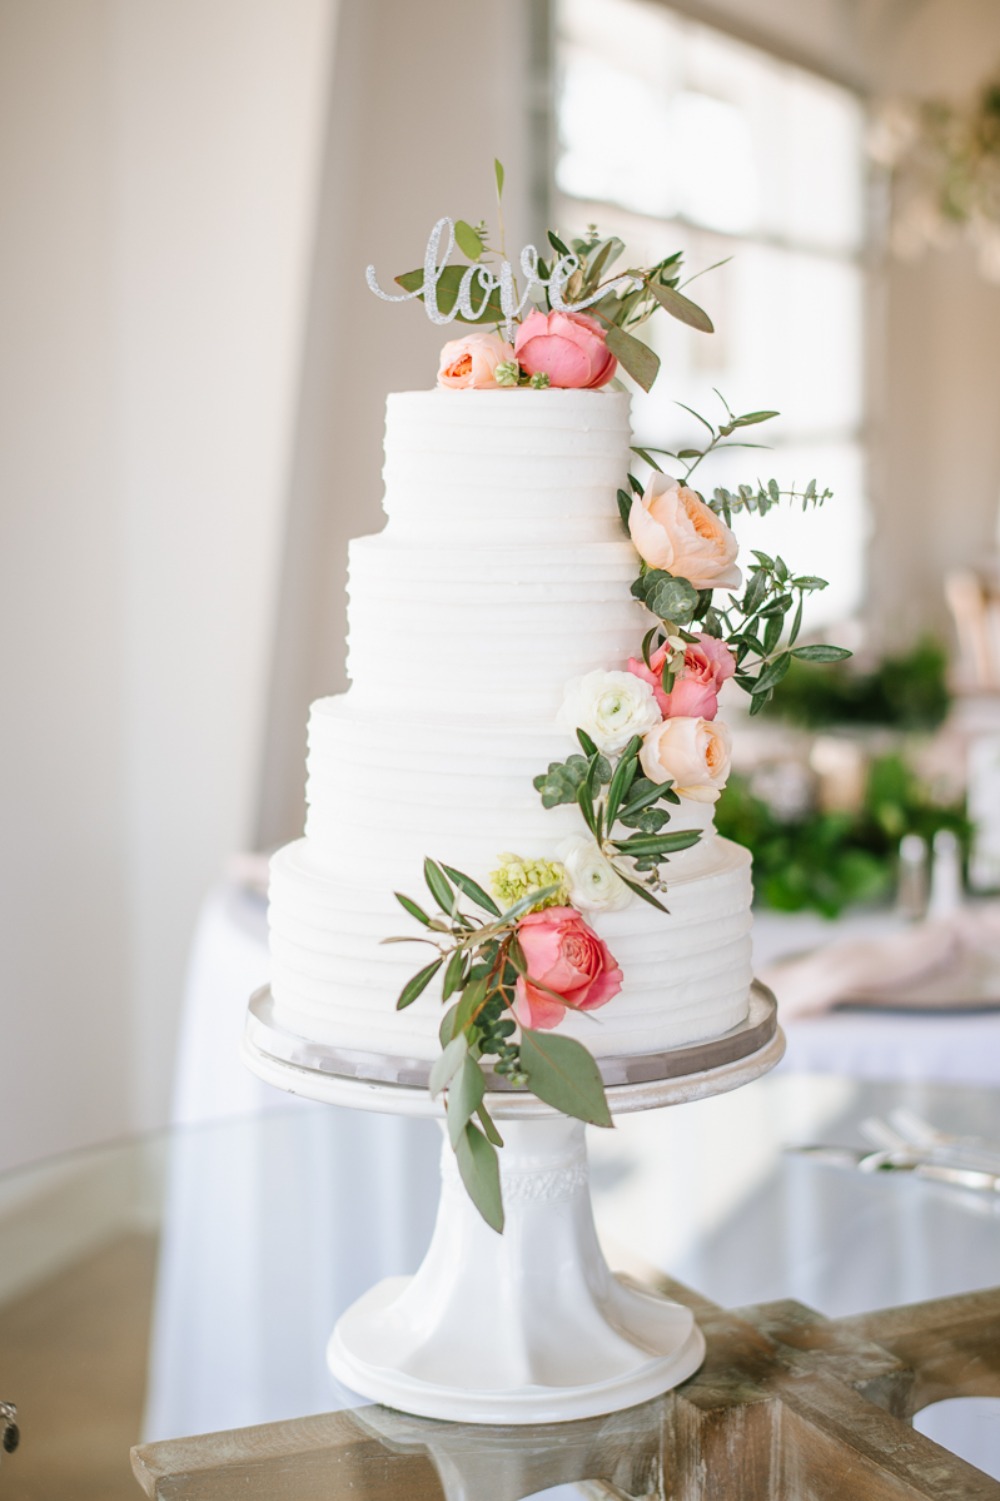 wedding cake with flower and greenery accents